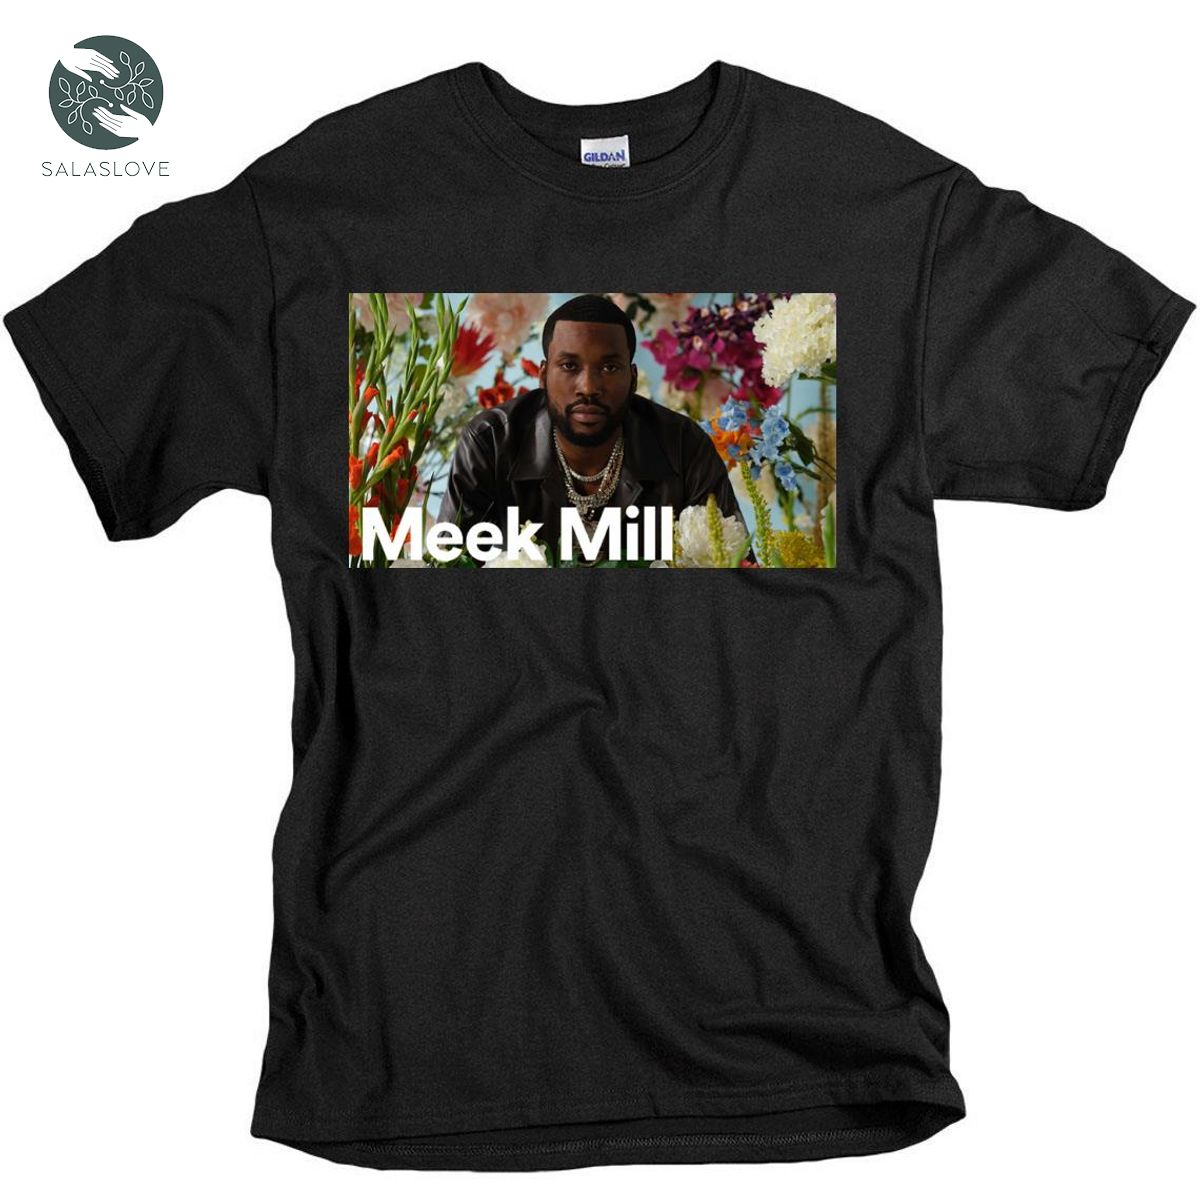 Meek Mill Gets Back To Business With Early Mornings Hoodie